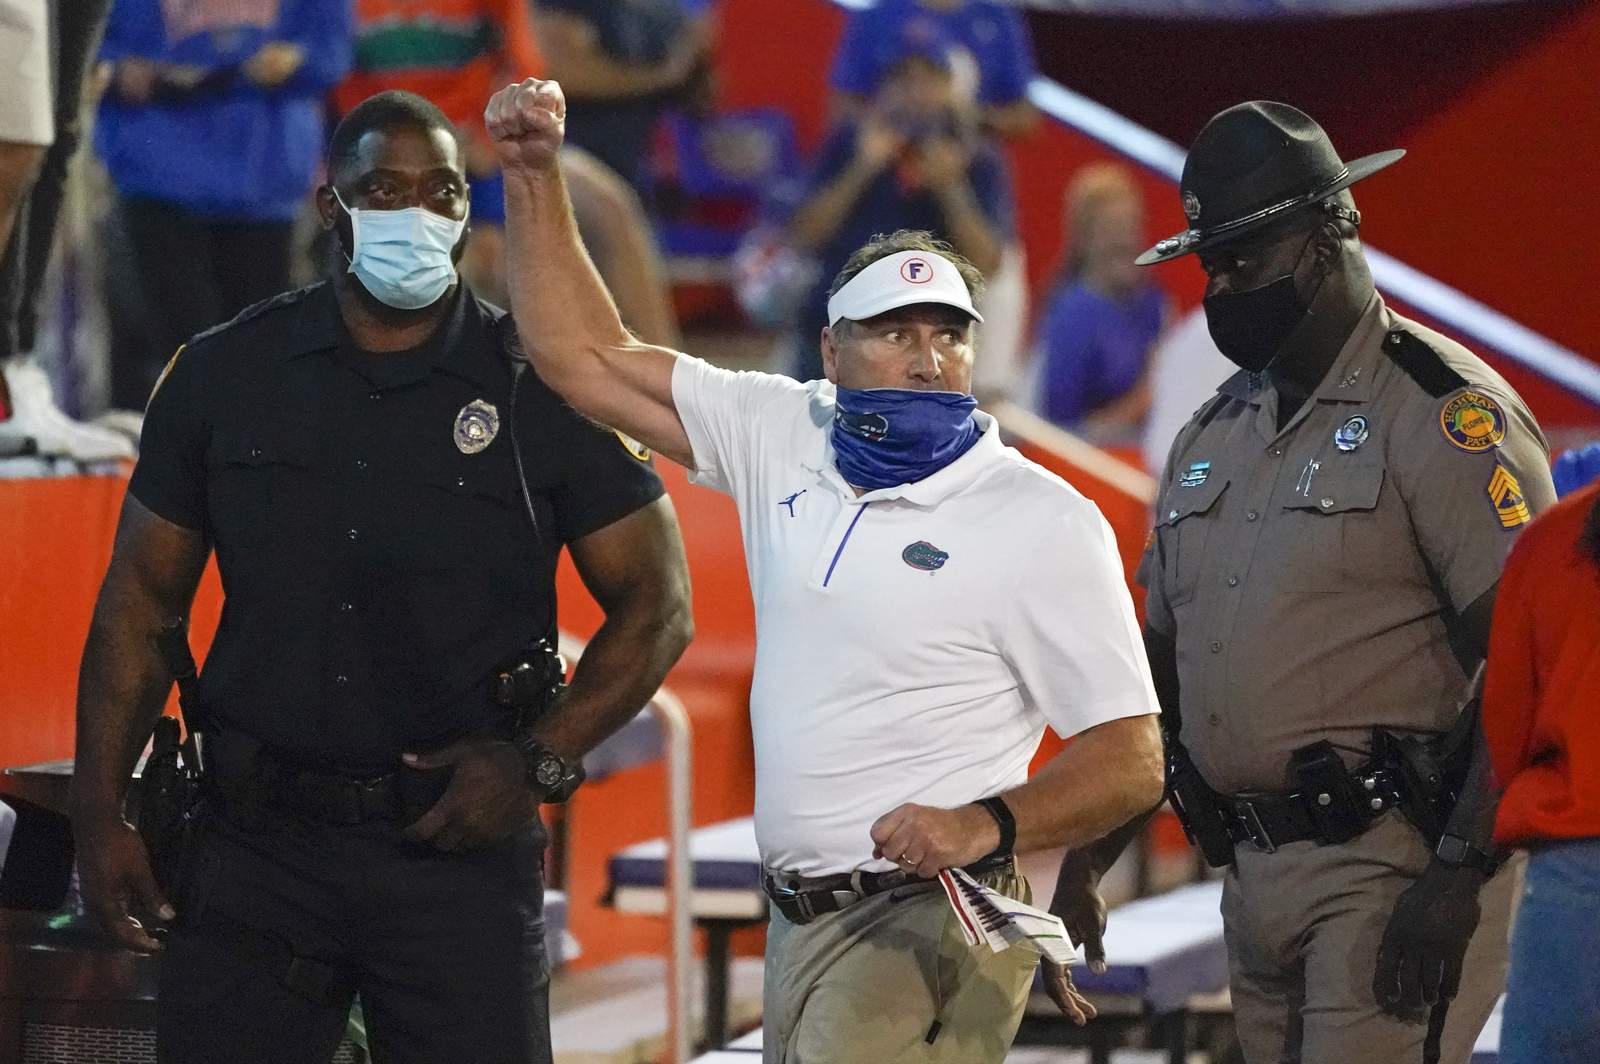 Florida's Mullen's uneven month ends in Darth Vader costume